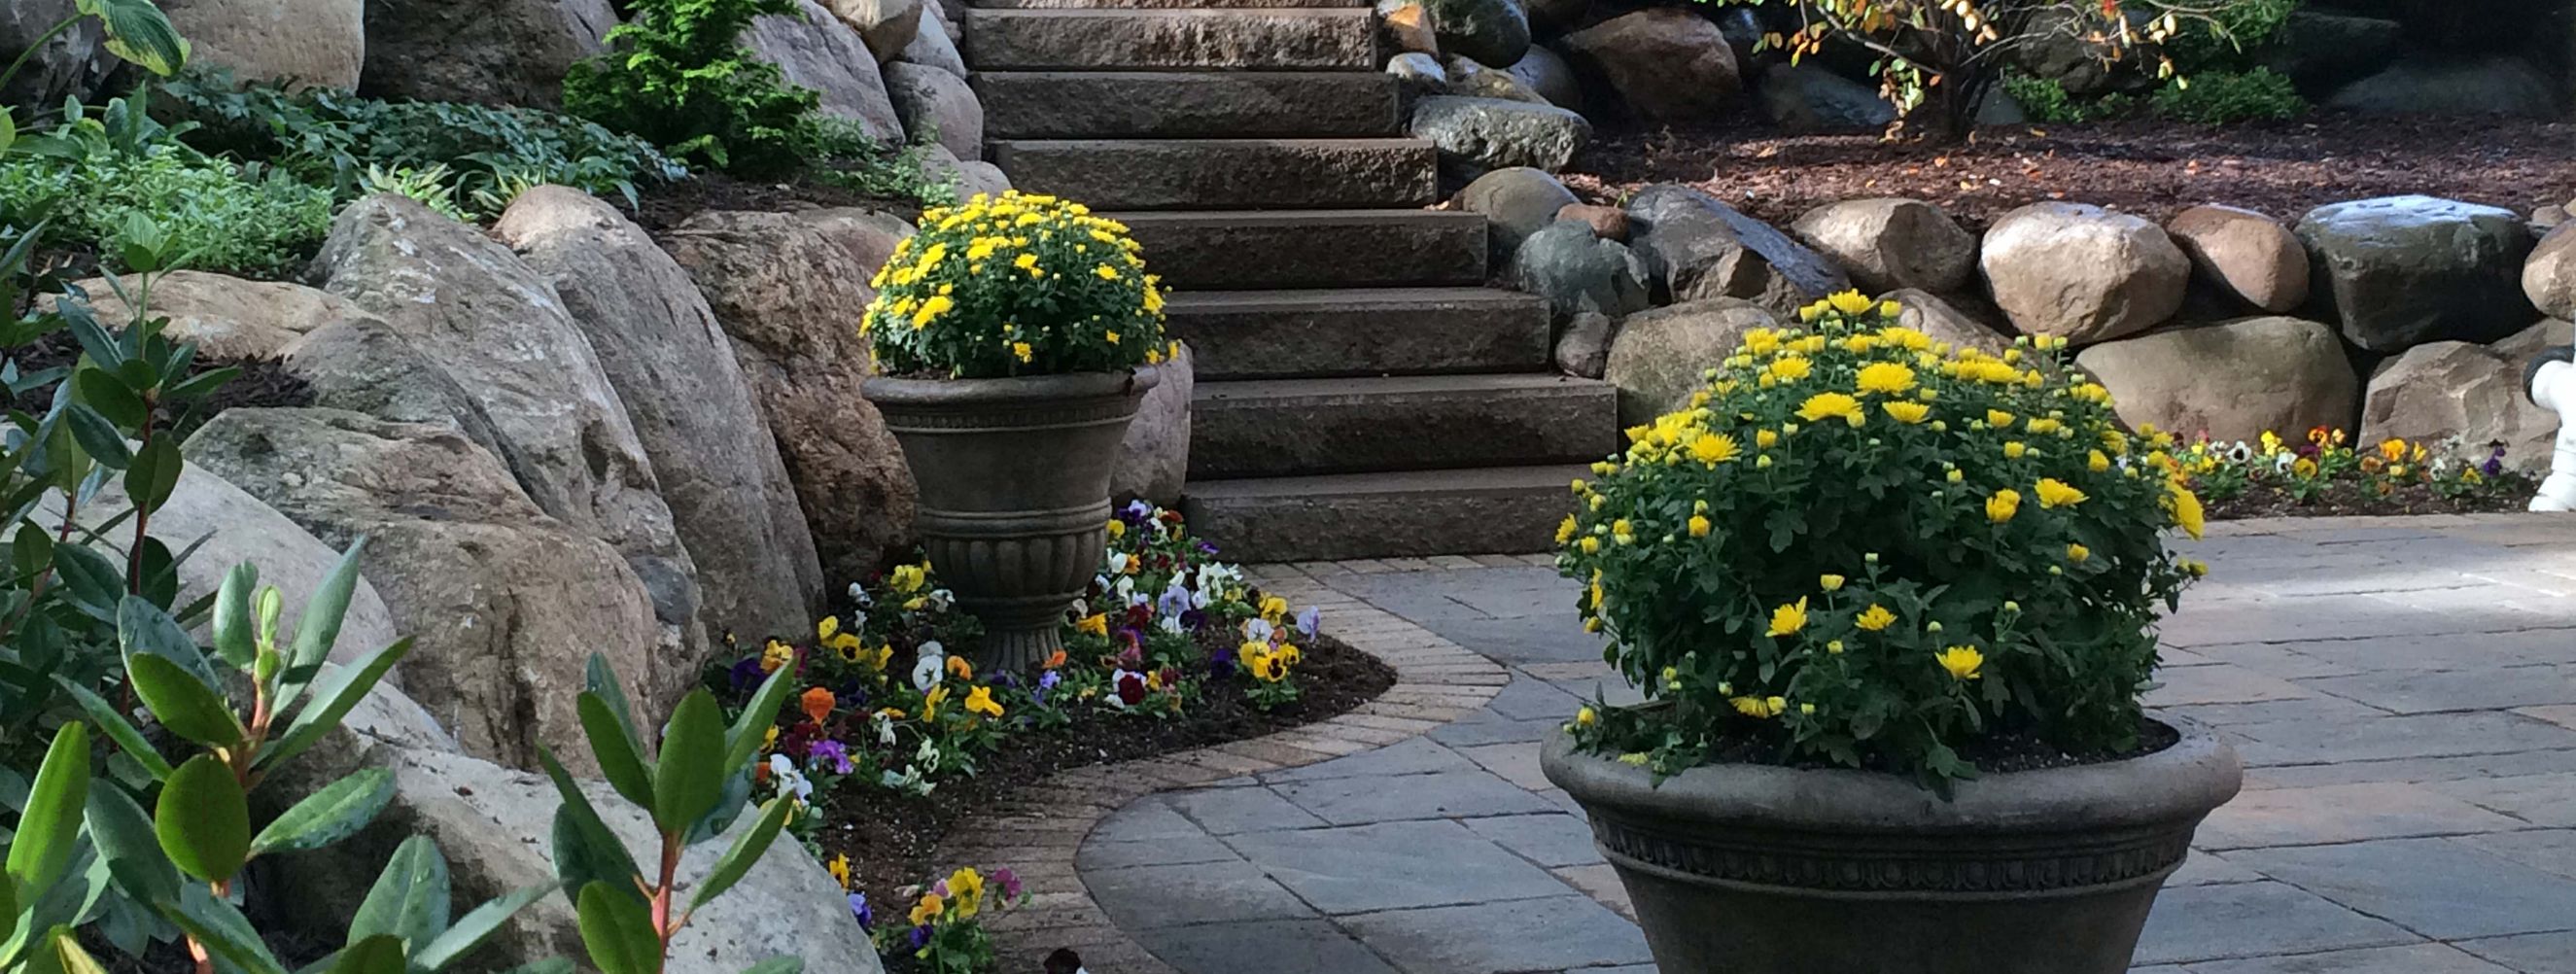 Brick patio, stone stairs, and rock walls with flowering planters.